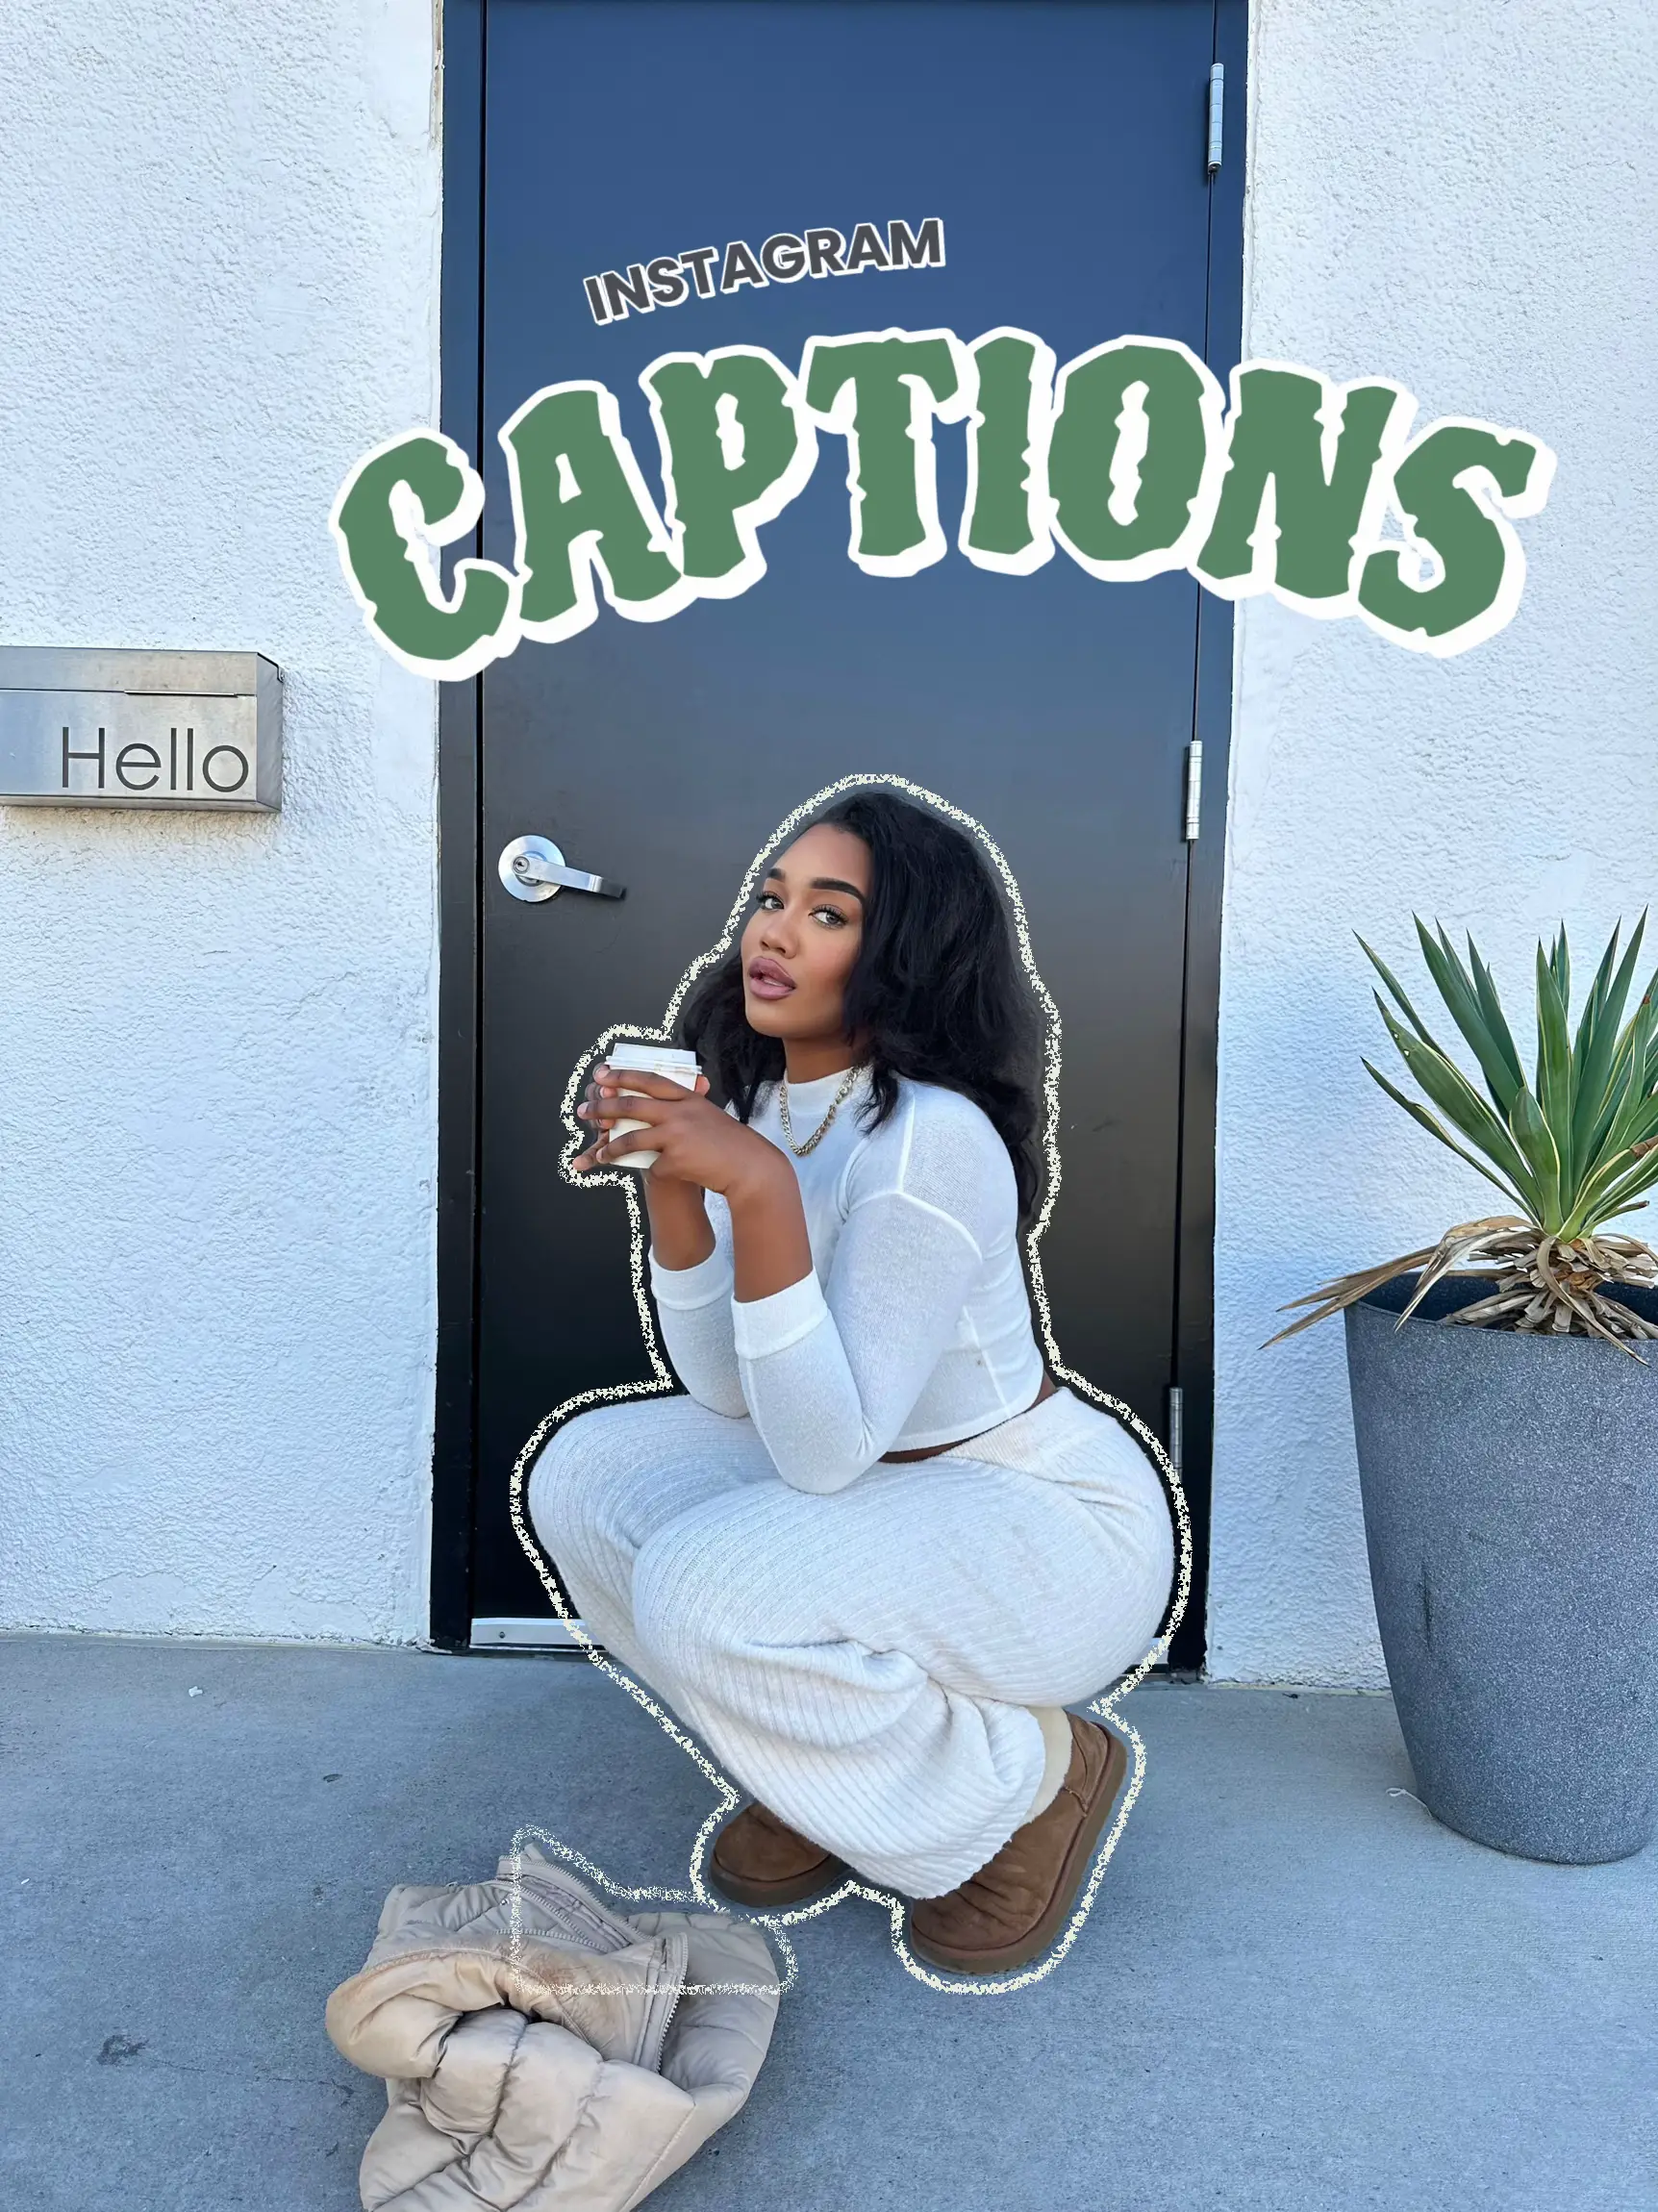 Instagram captions! Save for later 📌 's images